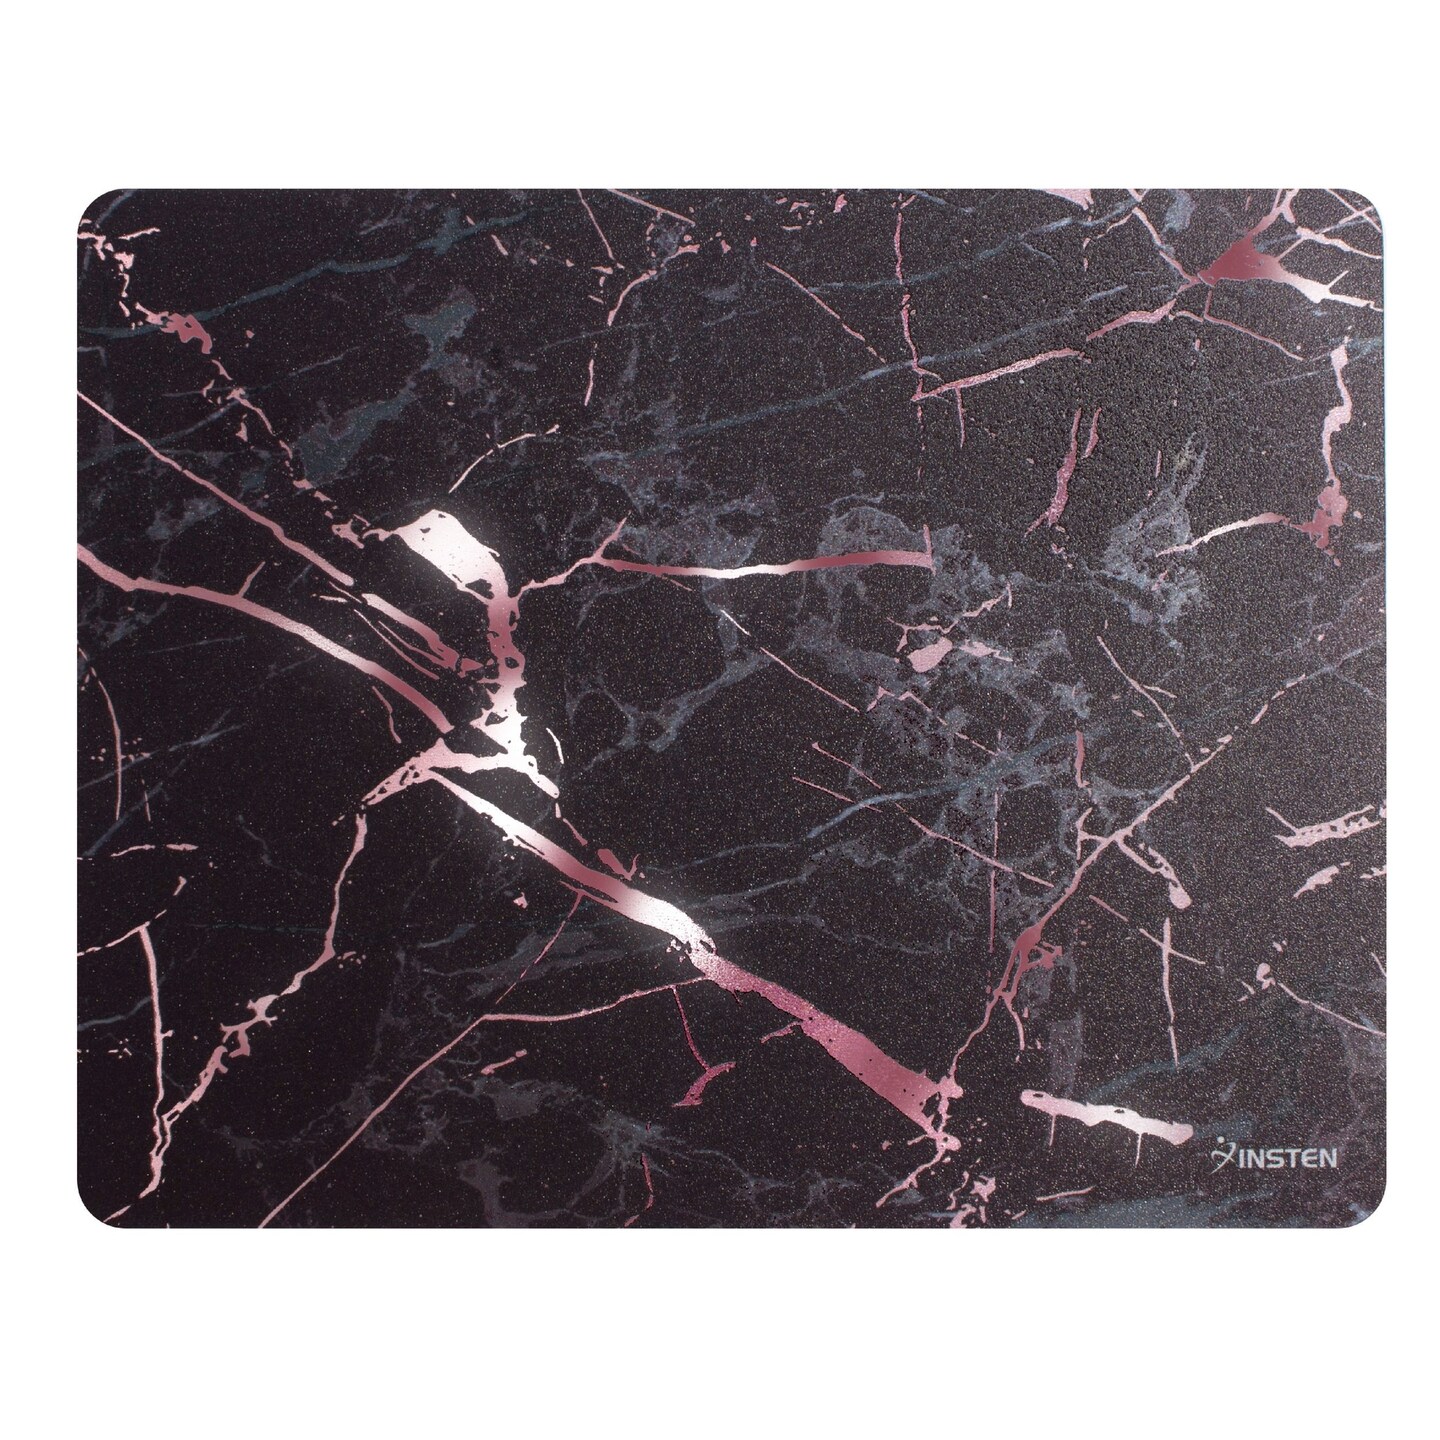 Insten Marble Laptop Computer Mouse Pad Mat High Quality Ultra Thin Reflective Non Slip  - Black/Rose Gold